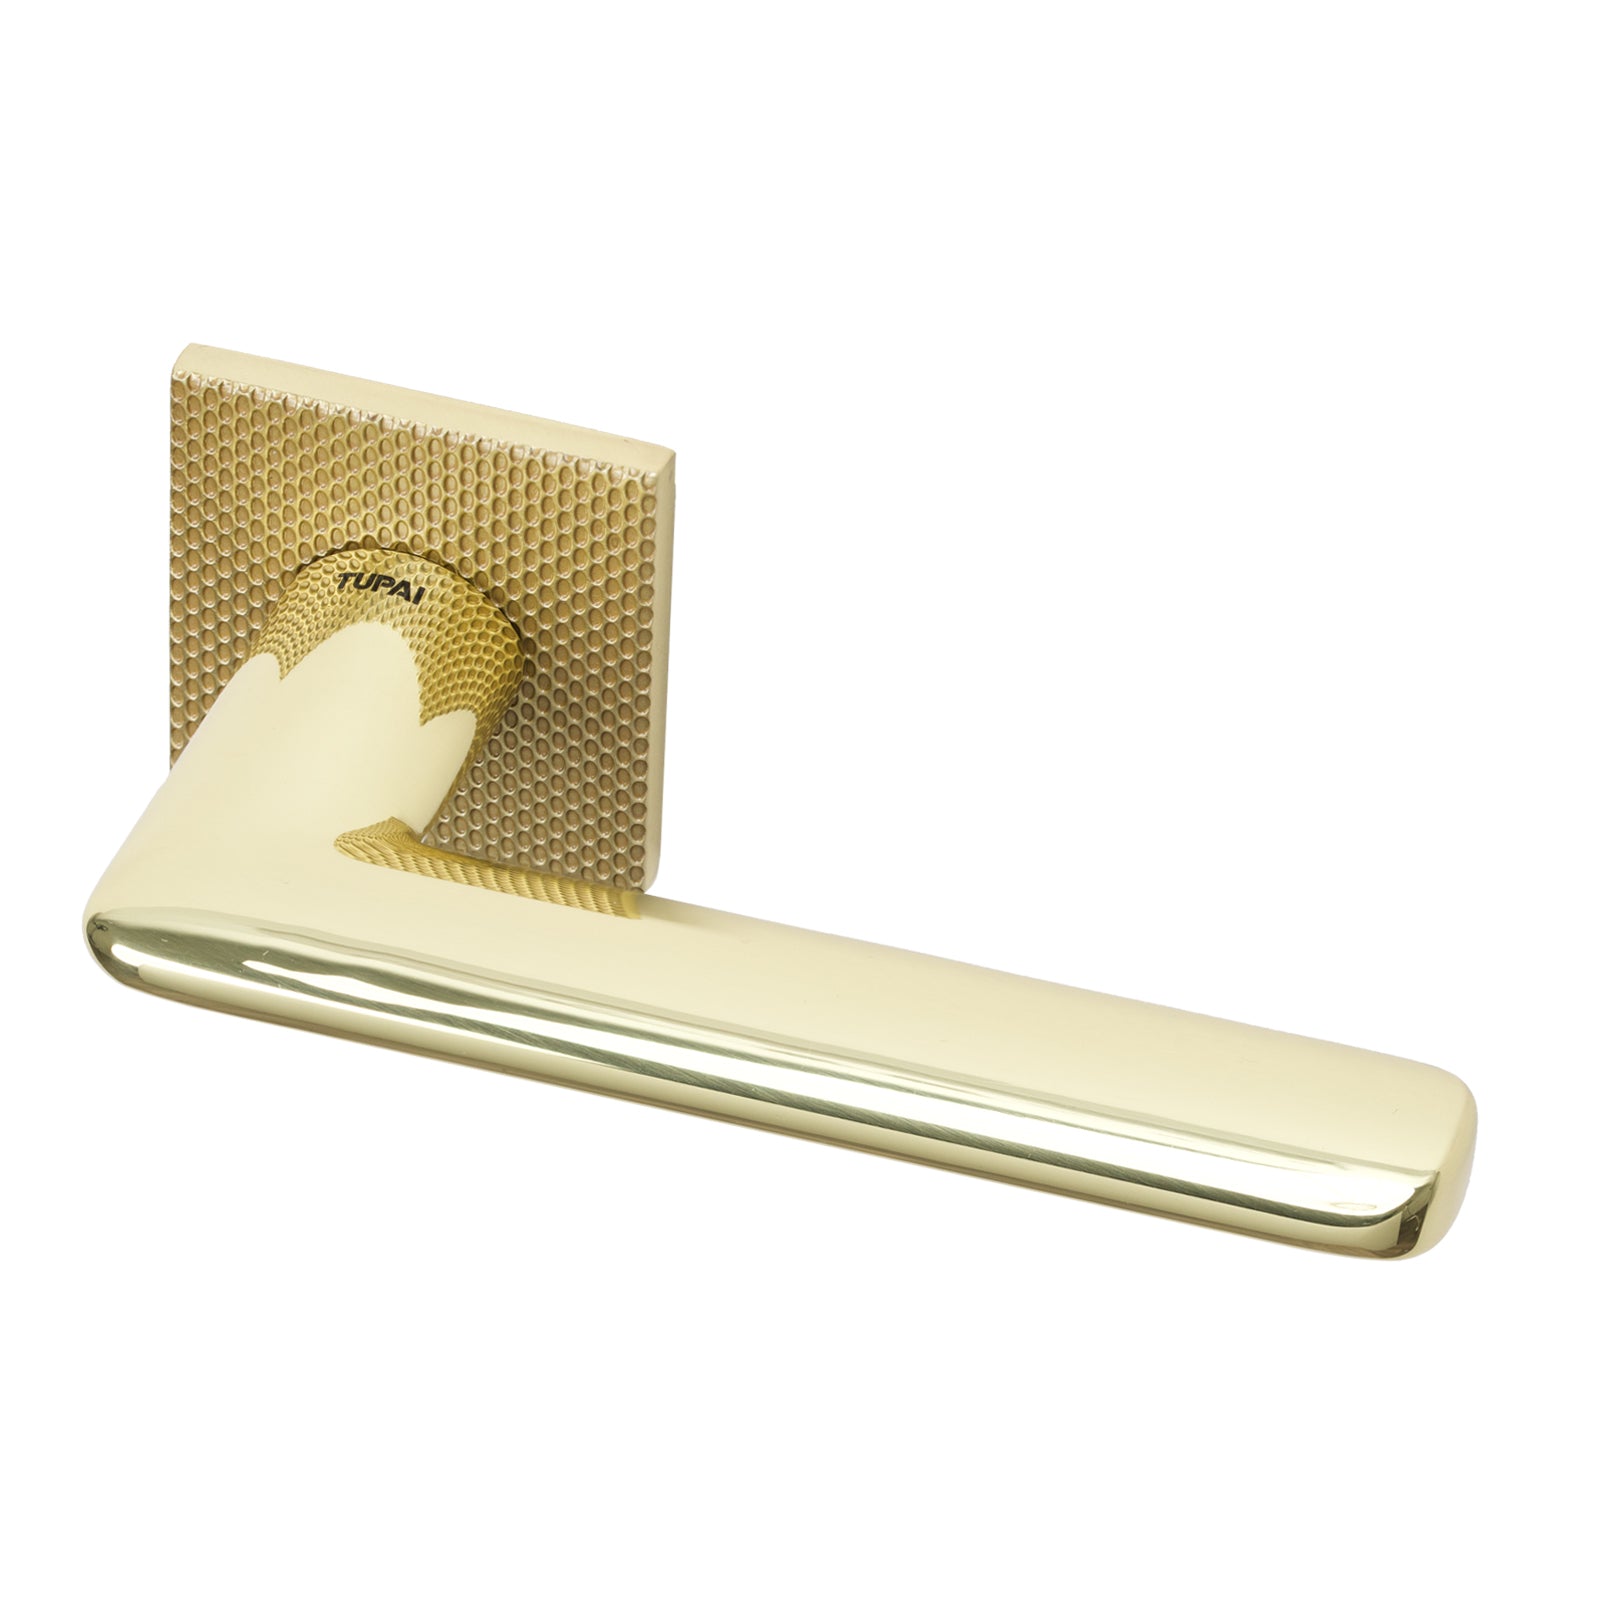 Tupai Edral lever on rose door handle with Pebbles texture design in Polished/Satin Brass Finish SHOW